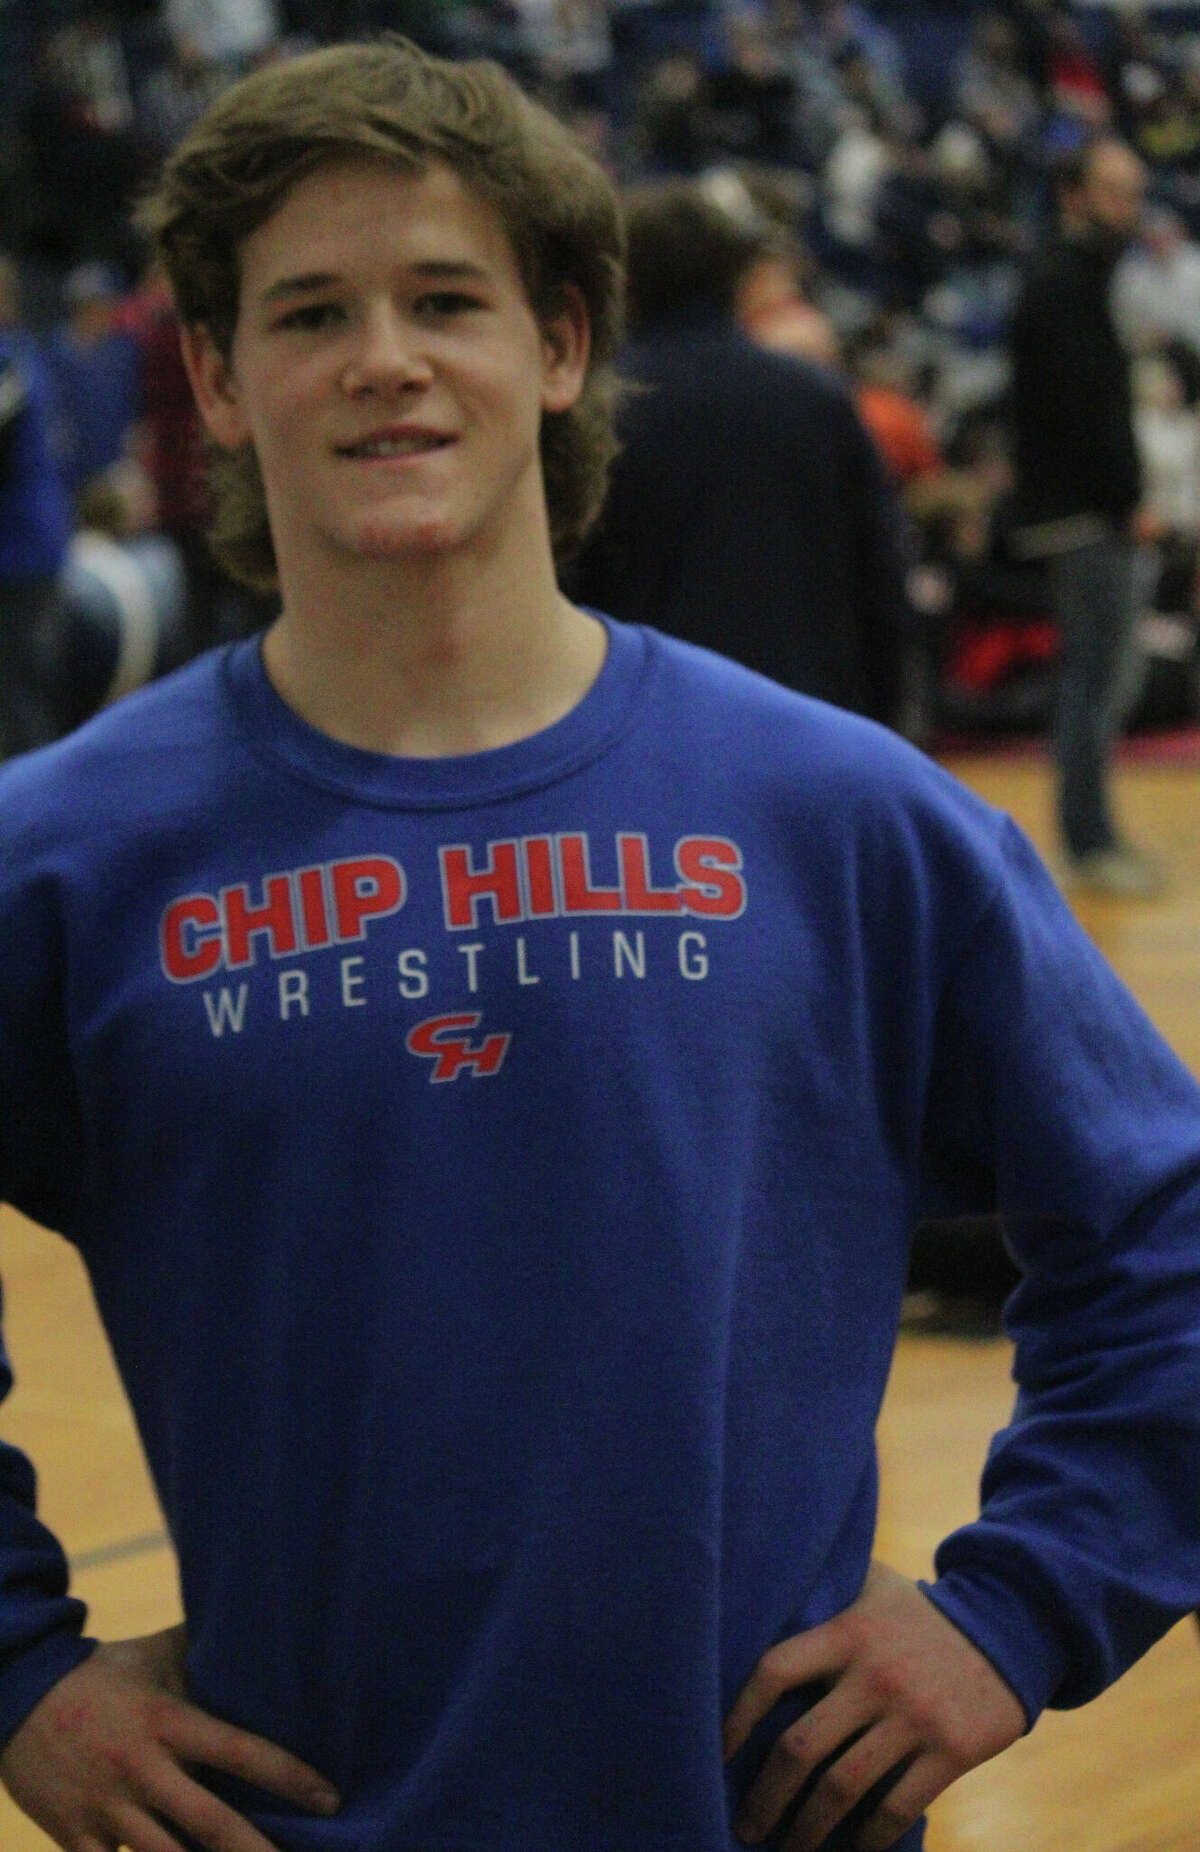 Tyler Geer will be among Chippewa Hills' top wrestlers this season.